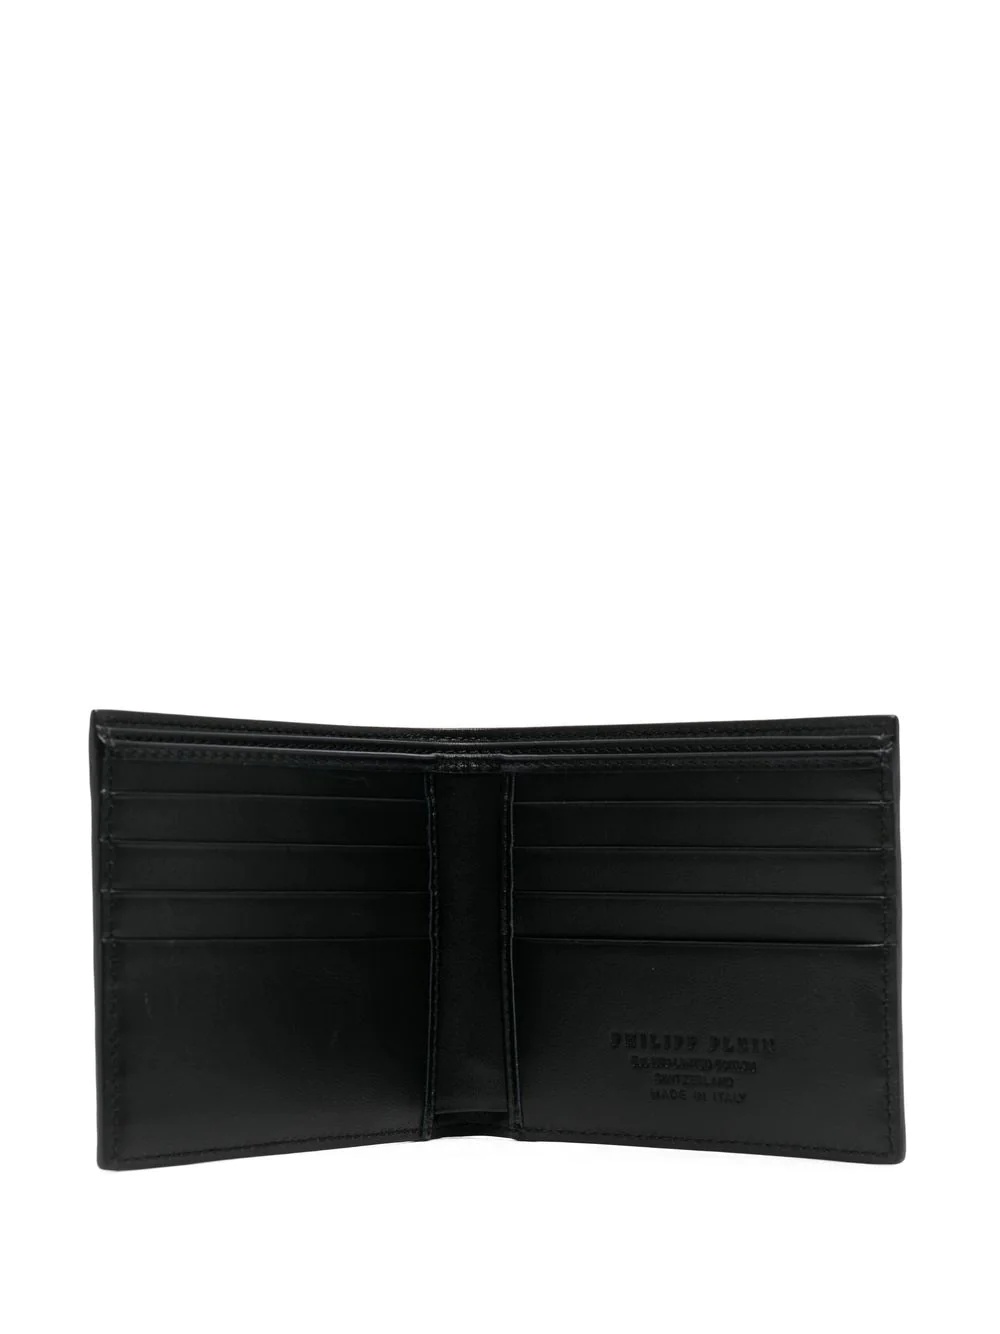 French leather wallet - 3